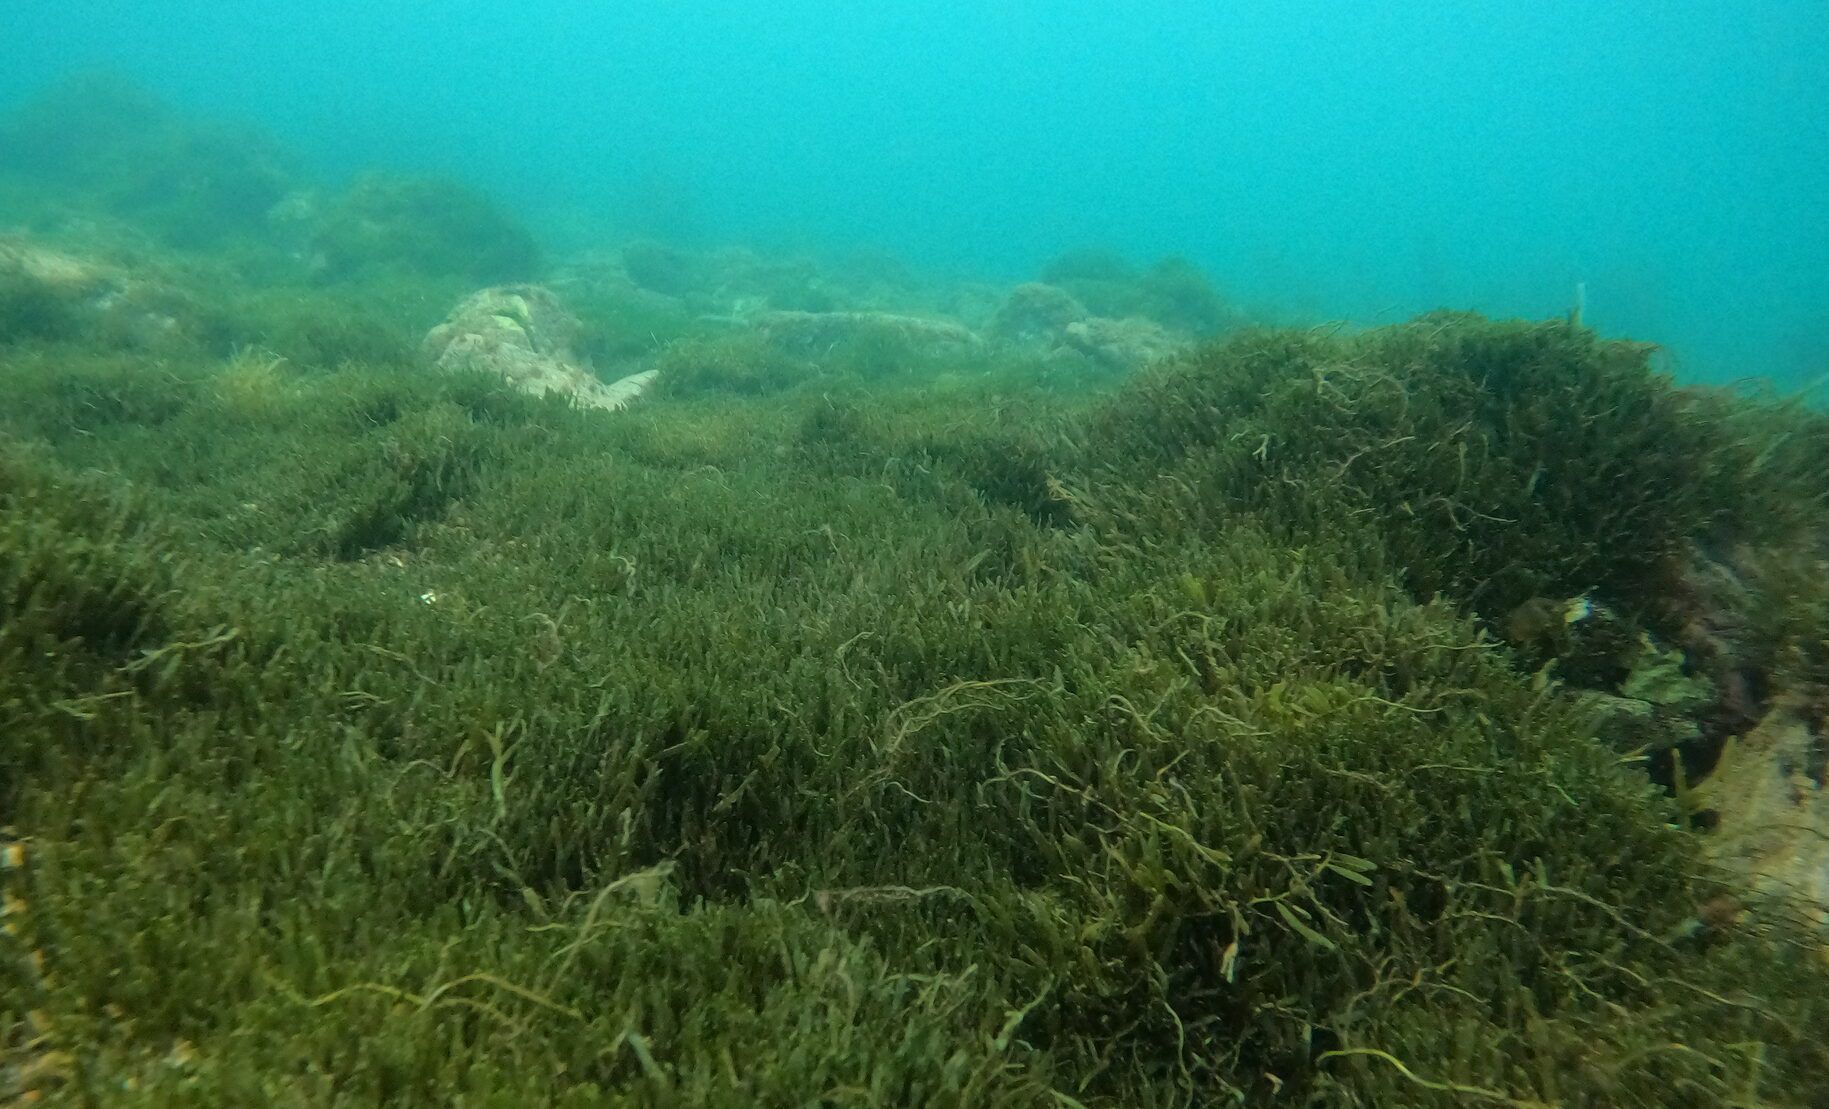 Caulerpa brachypus seaweed mats cover a patch of seafloor in Auckland